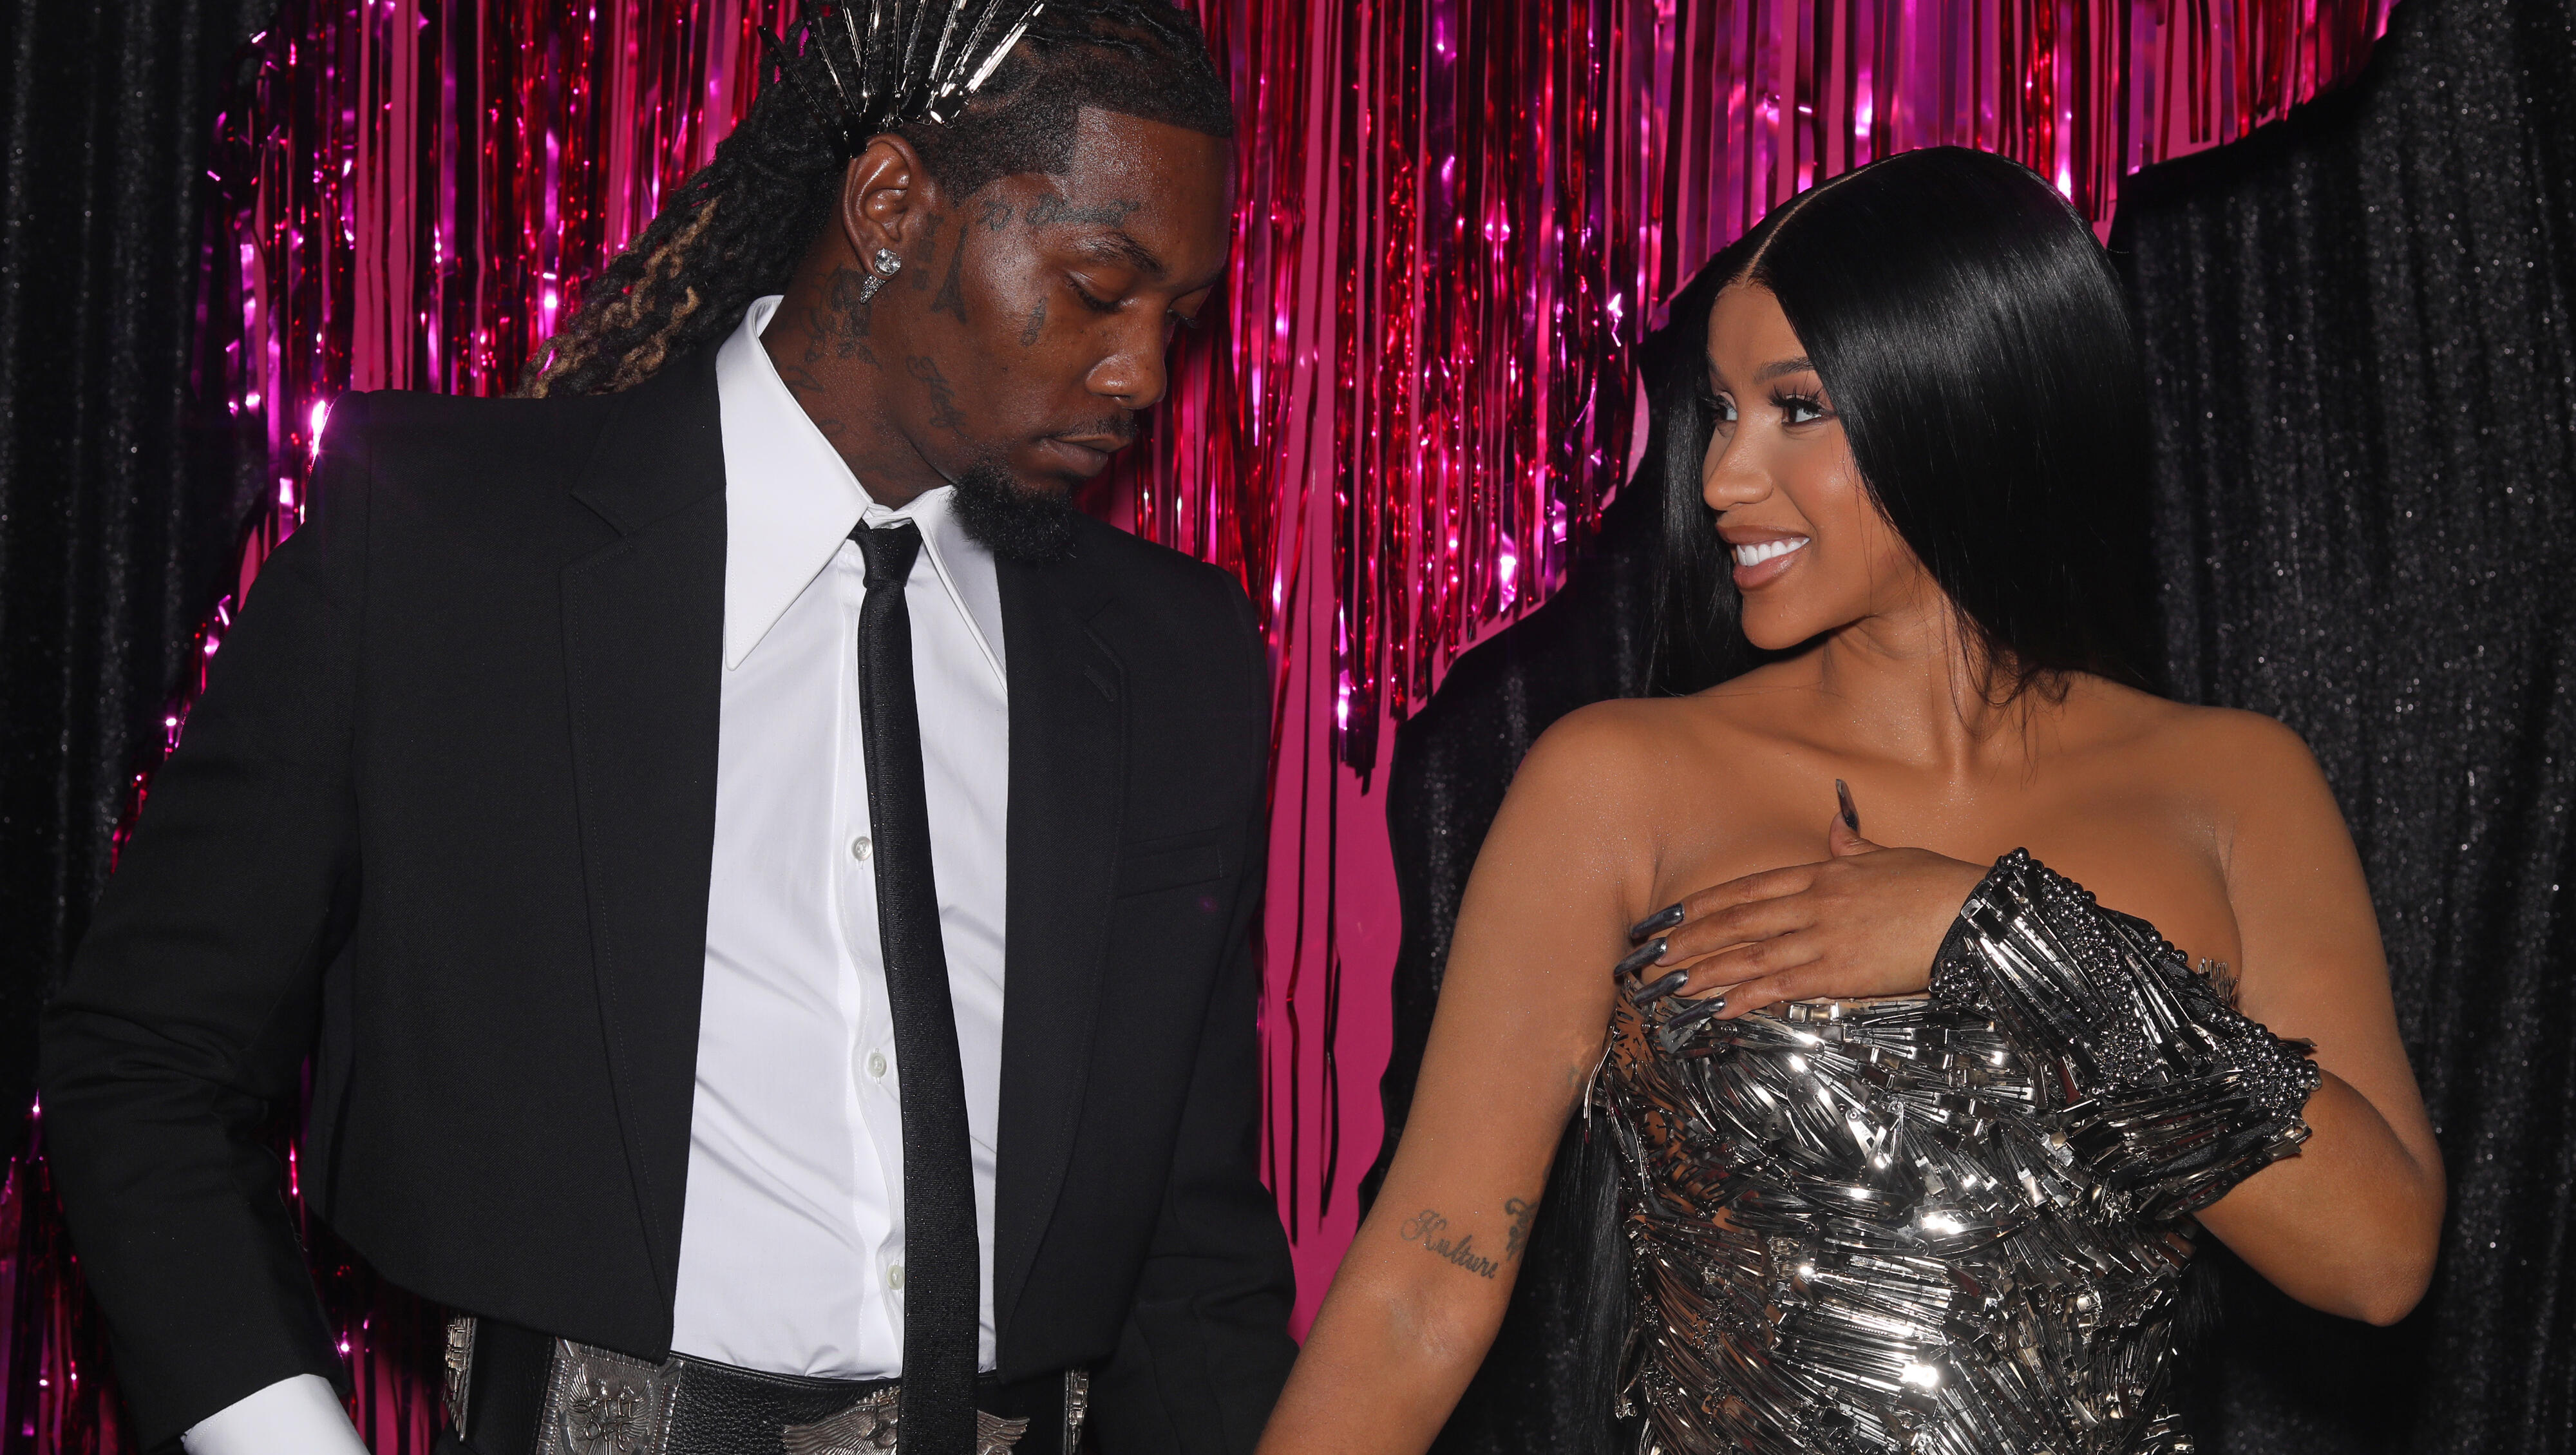 Cardi B. Confirms She's Single! No Longer with Offset!